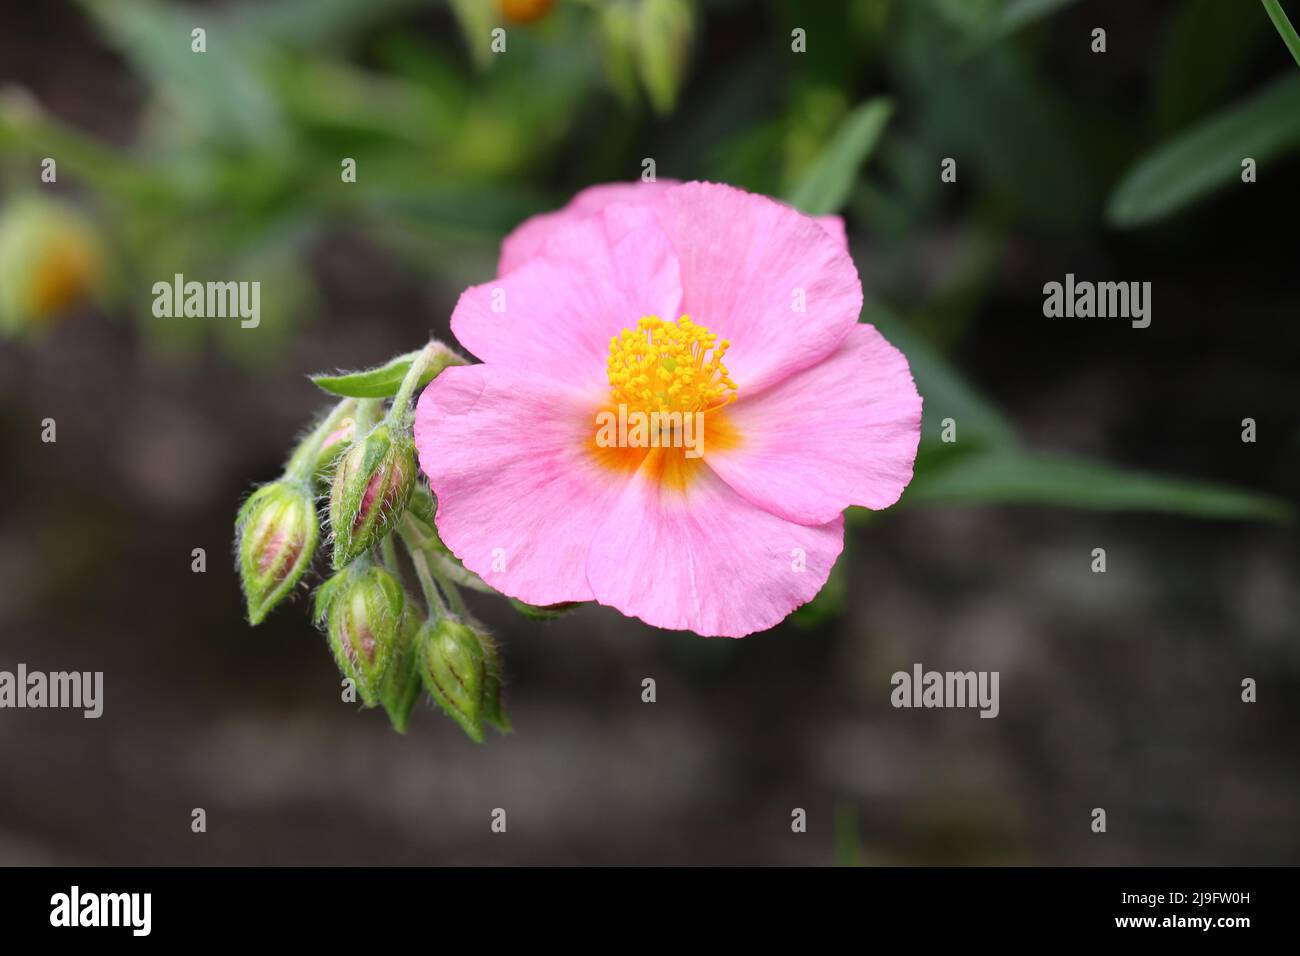 close-up of a pretty pink helianthemum flower and its hairy buds against a dark blurred background, copy space Stock Photo